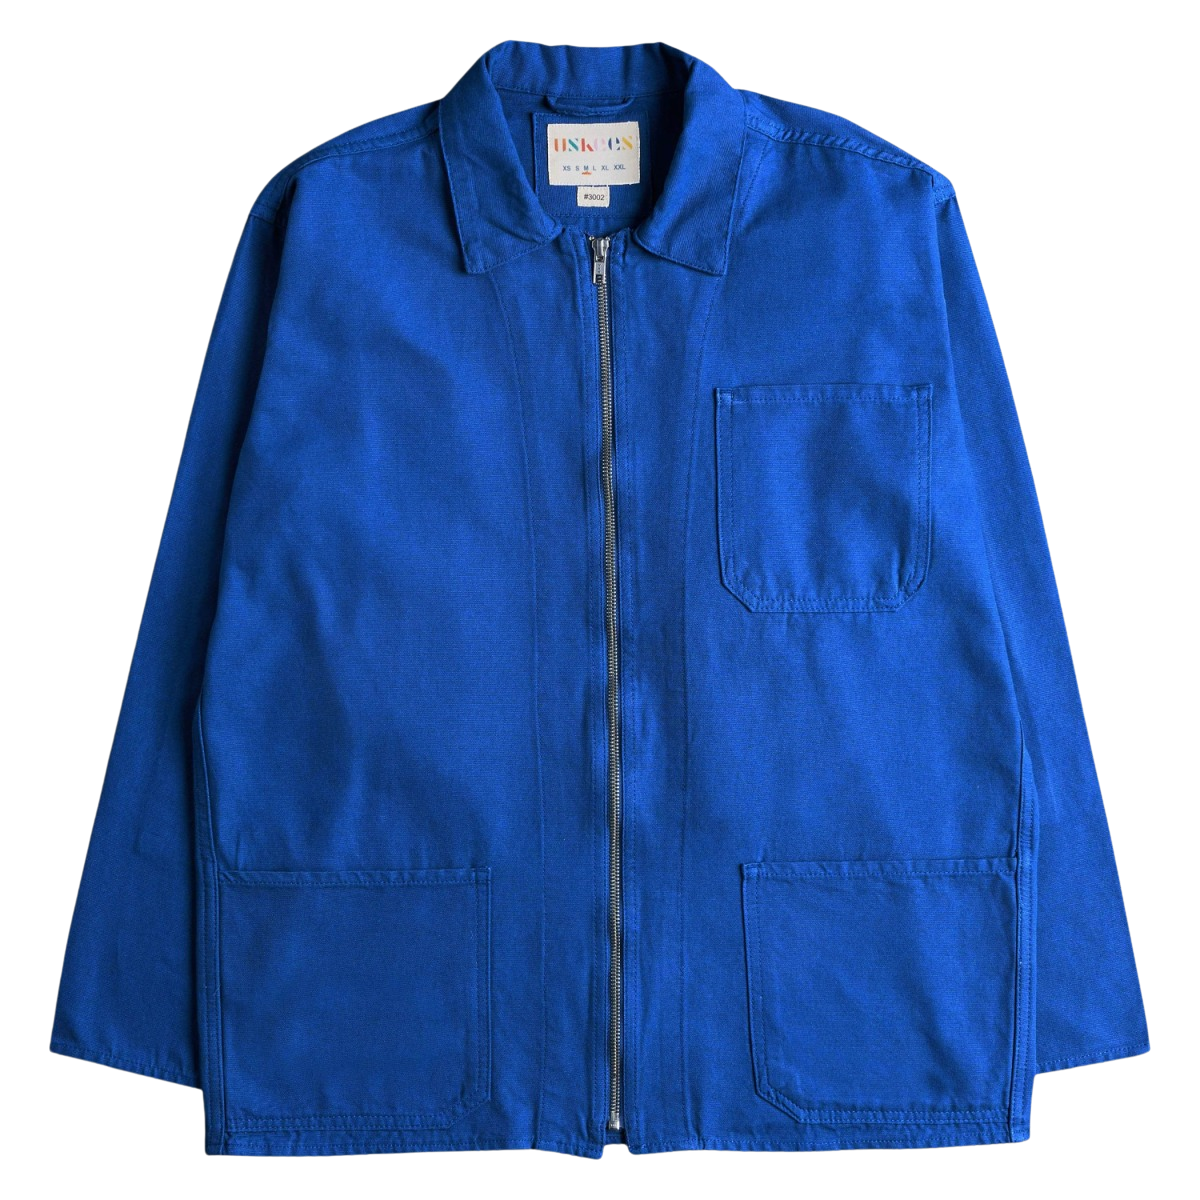 https://storage.googleapis.com/download/storage/v1/b/whering.appspot.com/o/marketplace_product_images%2Fuksees-the-3002-zipfront-jacket-ultra-blue-navy-9atEqTHPhjUMWzYujEFHxb.png?generation=1682093985461118&alt=media